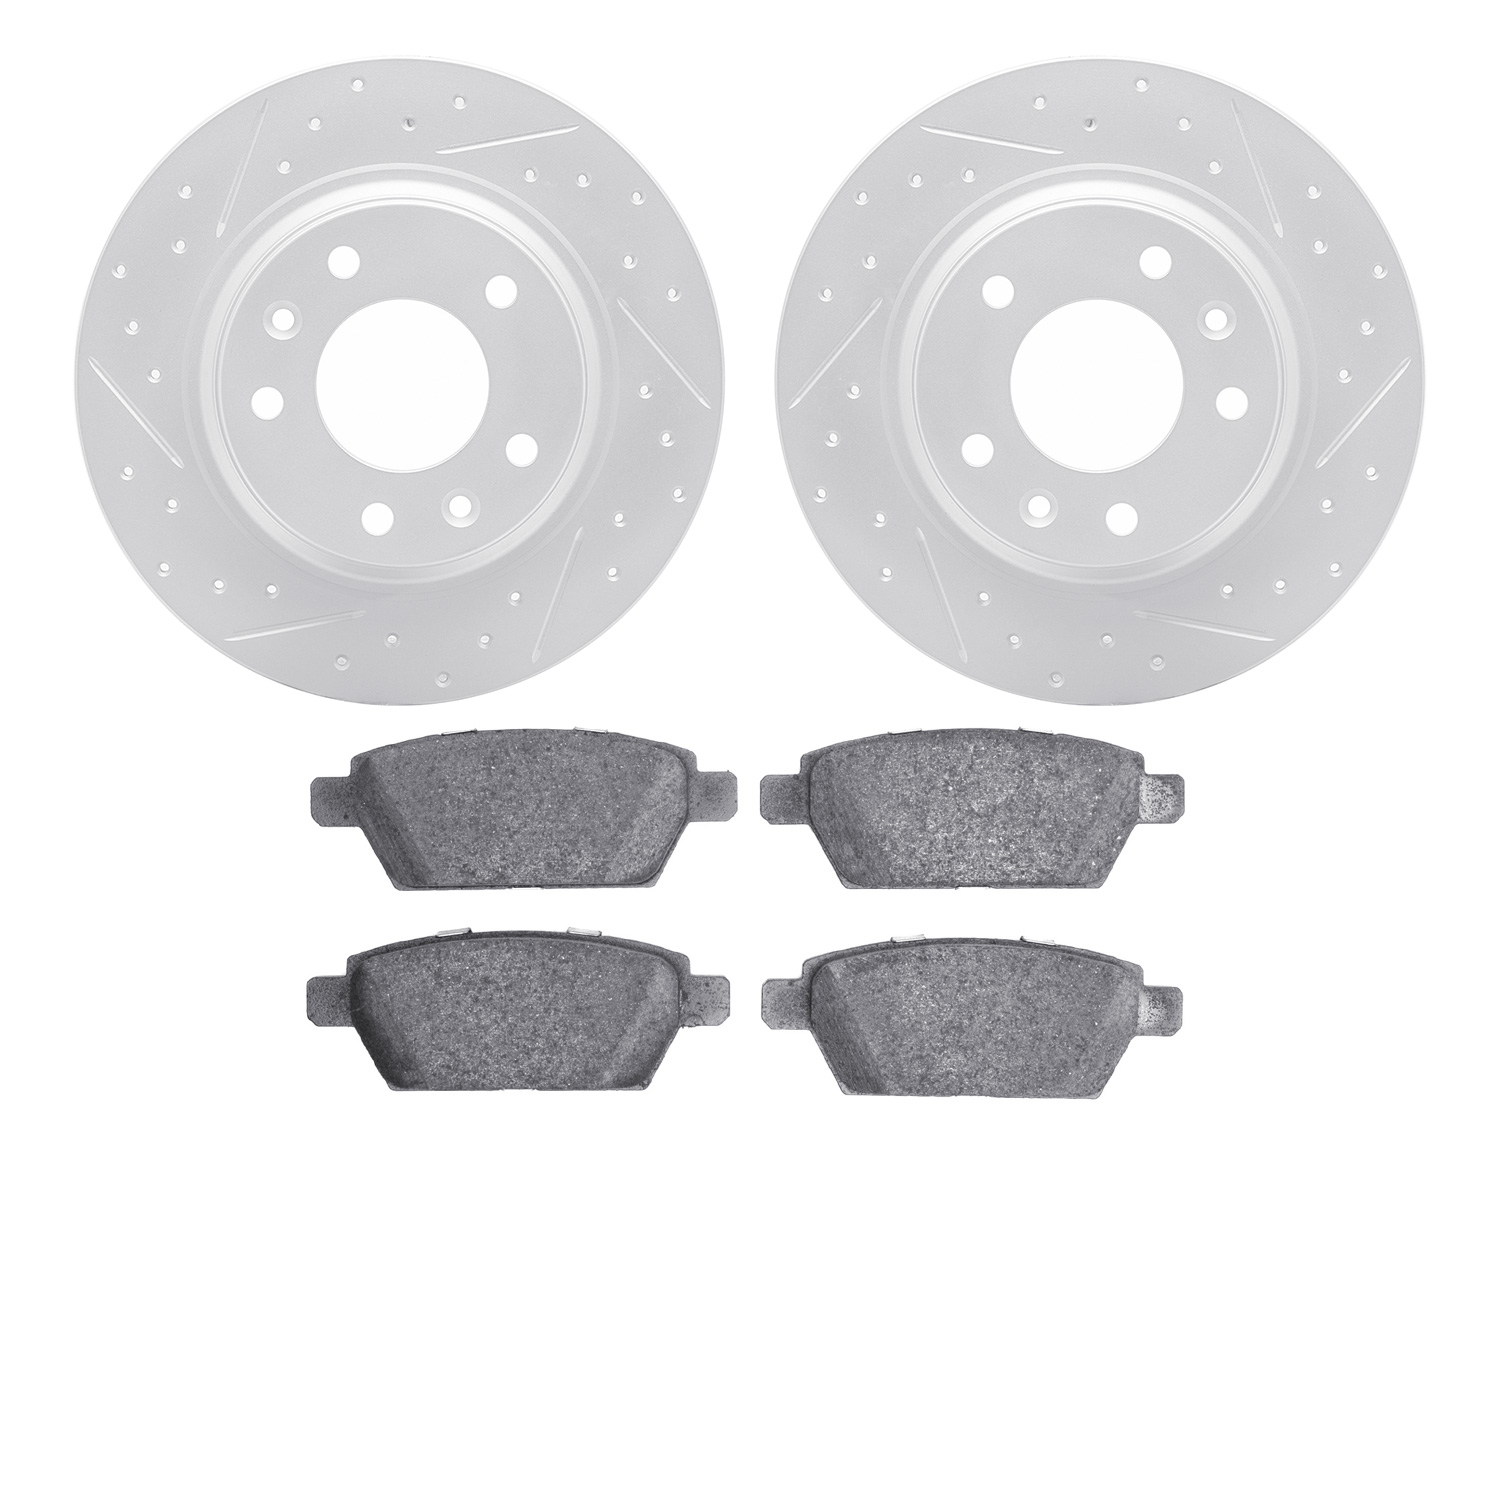 2502-54060 Geoperformance Drilled/Slotted Rotors w/5000 Advanced Brake Pads Kit, 2006-2013 Ford/Lincoln/Mercury/Mazda, Position: